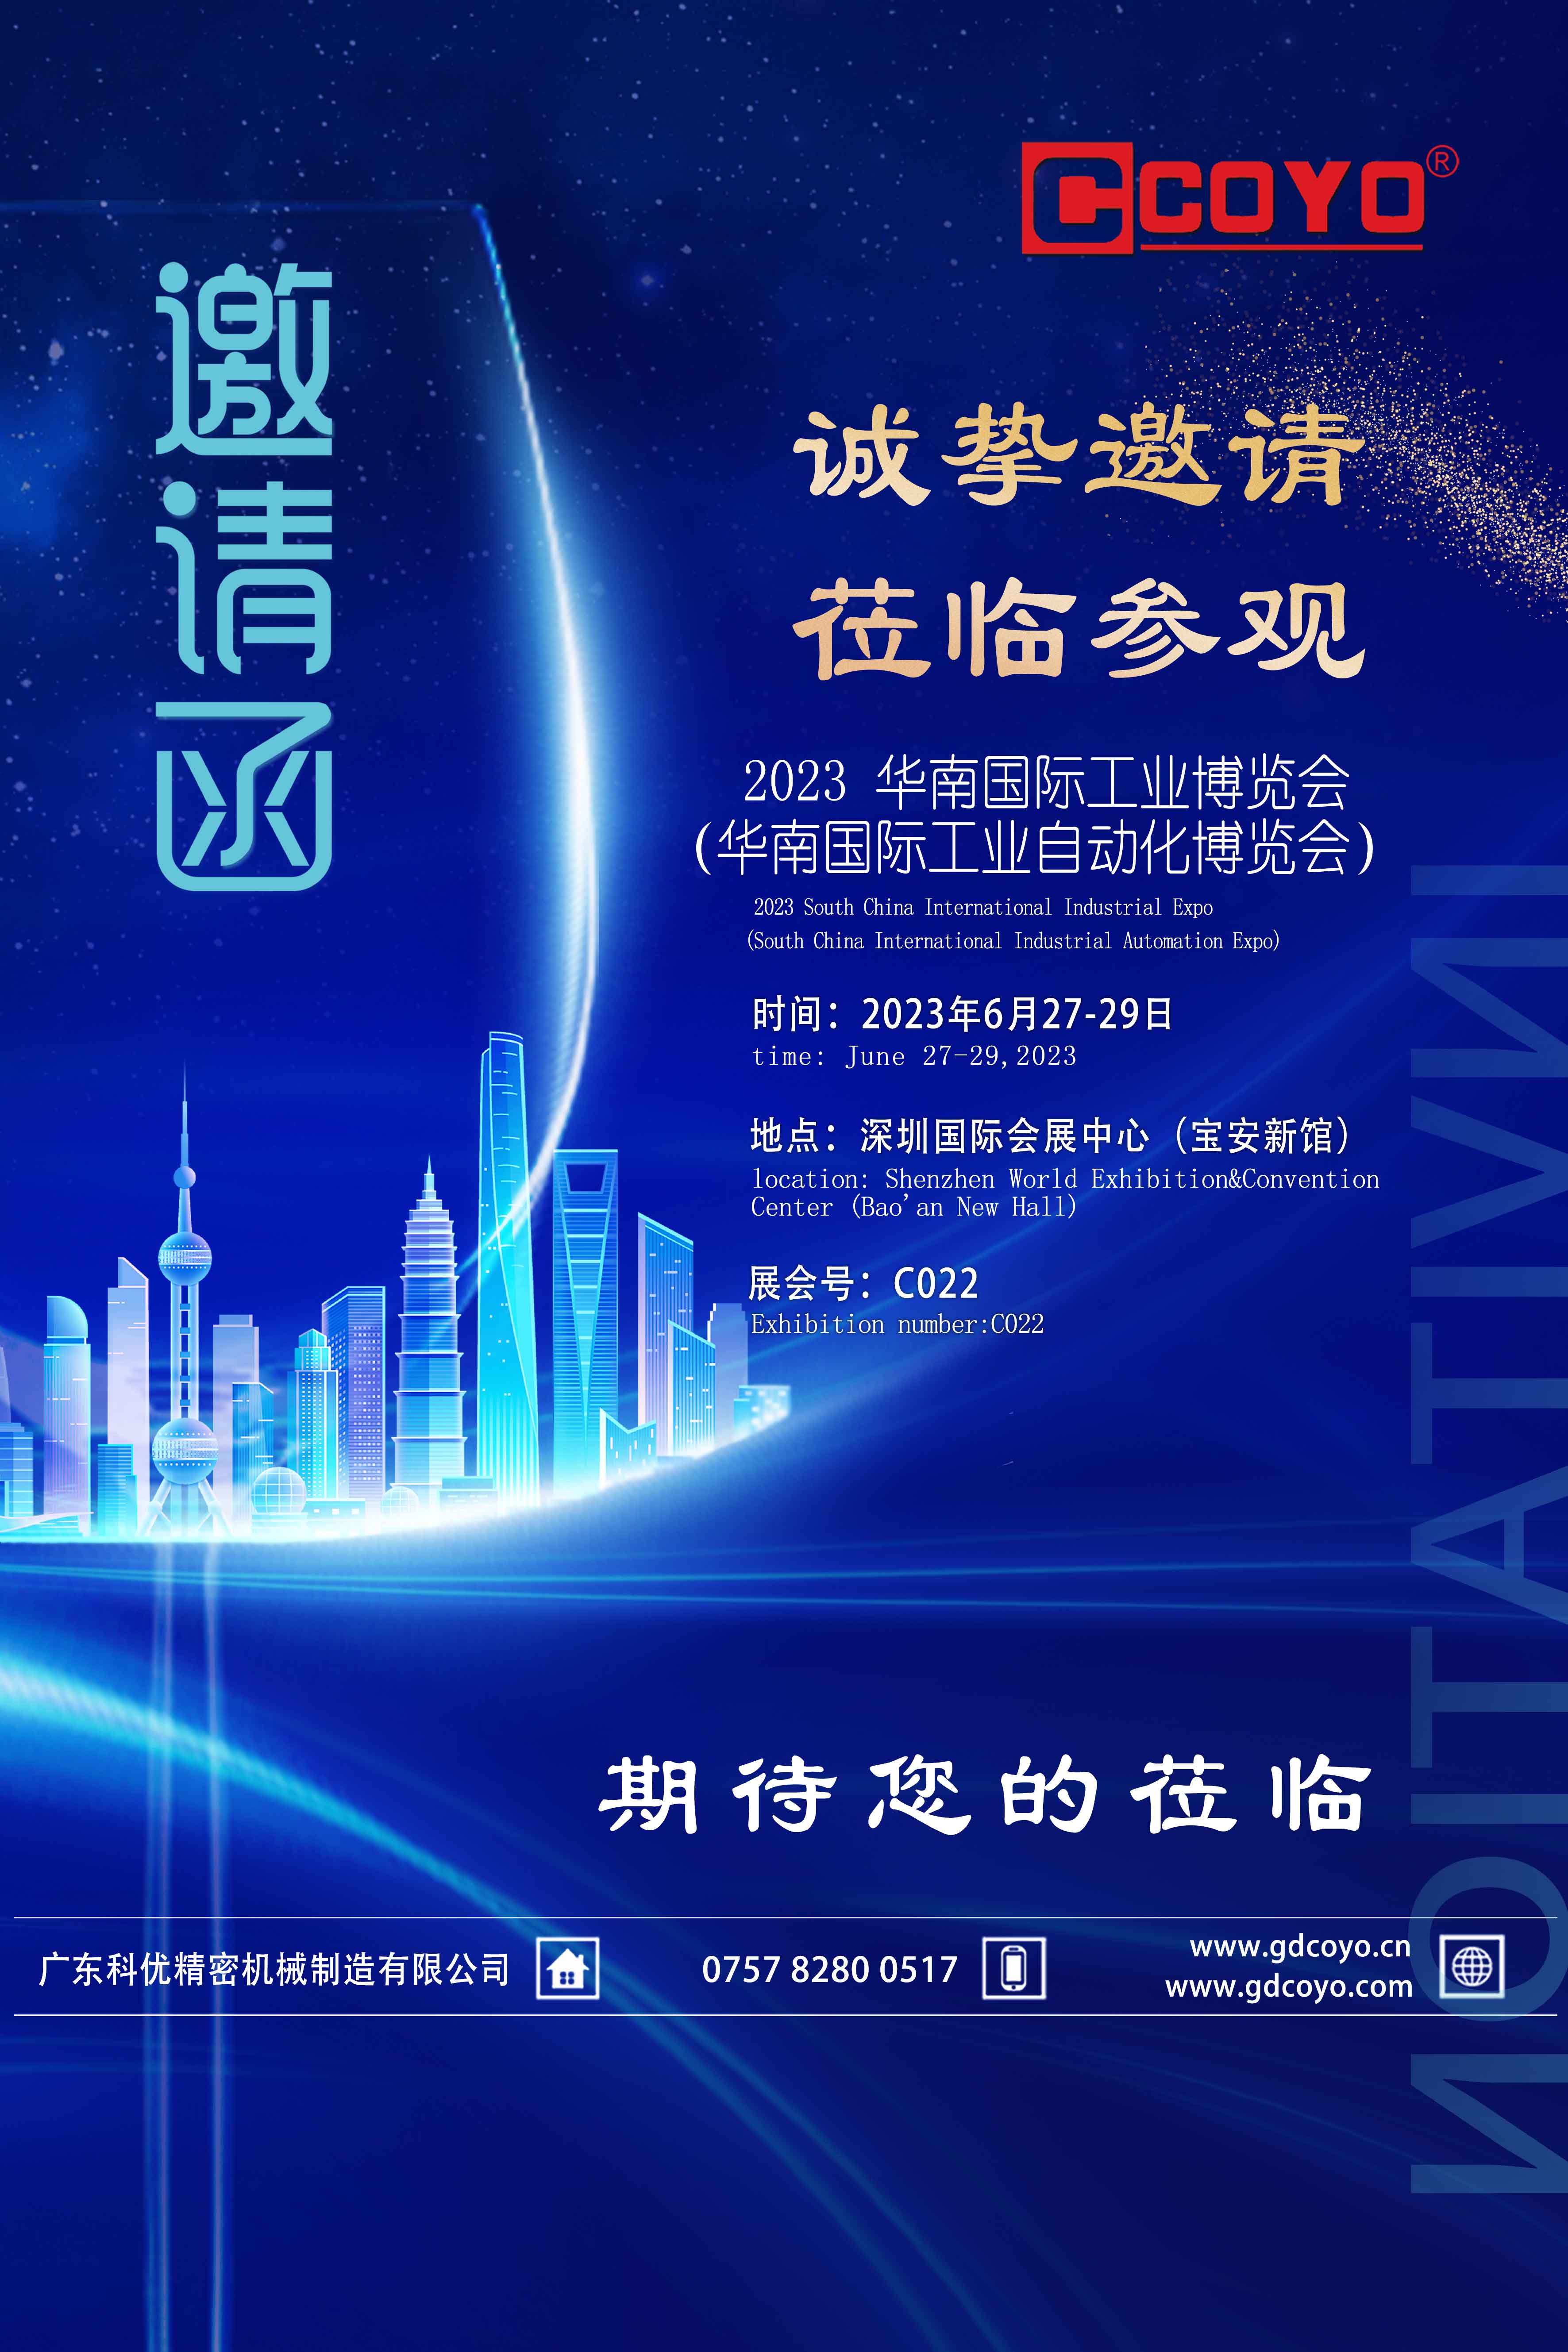 Guangdong Keyou sincerely invites you to participate in the South China International Industrial Expo